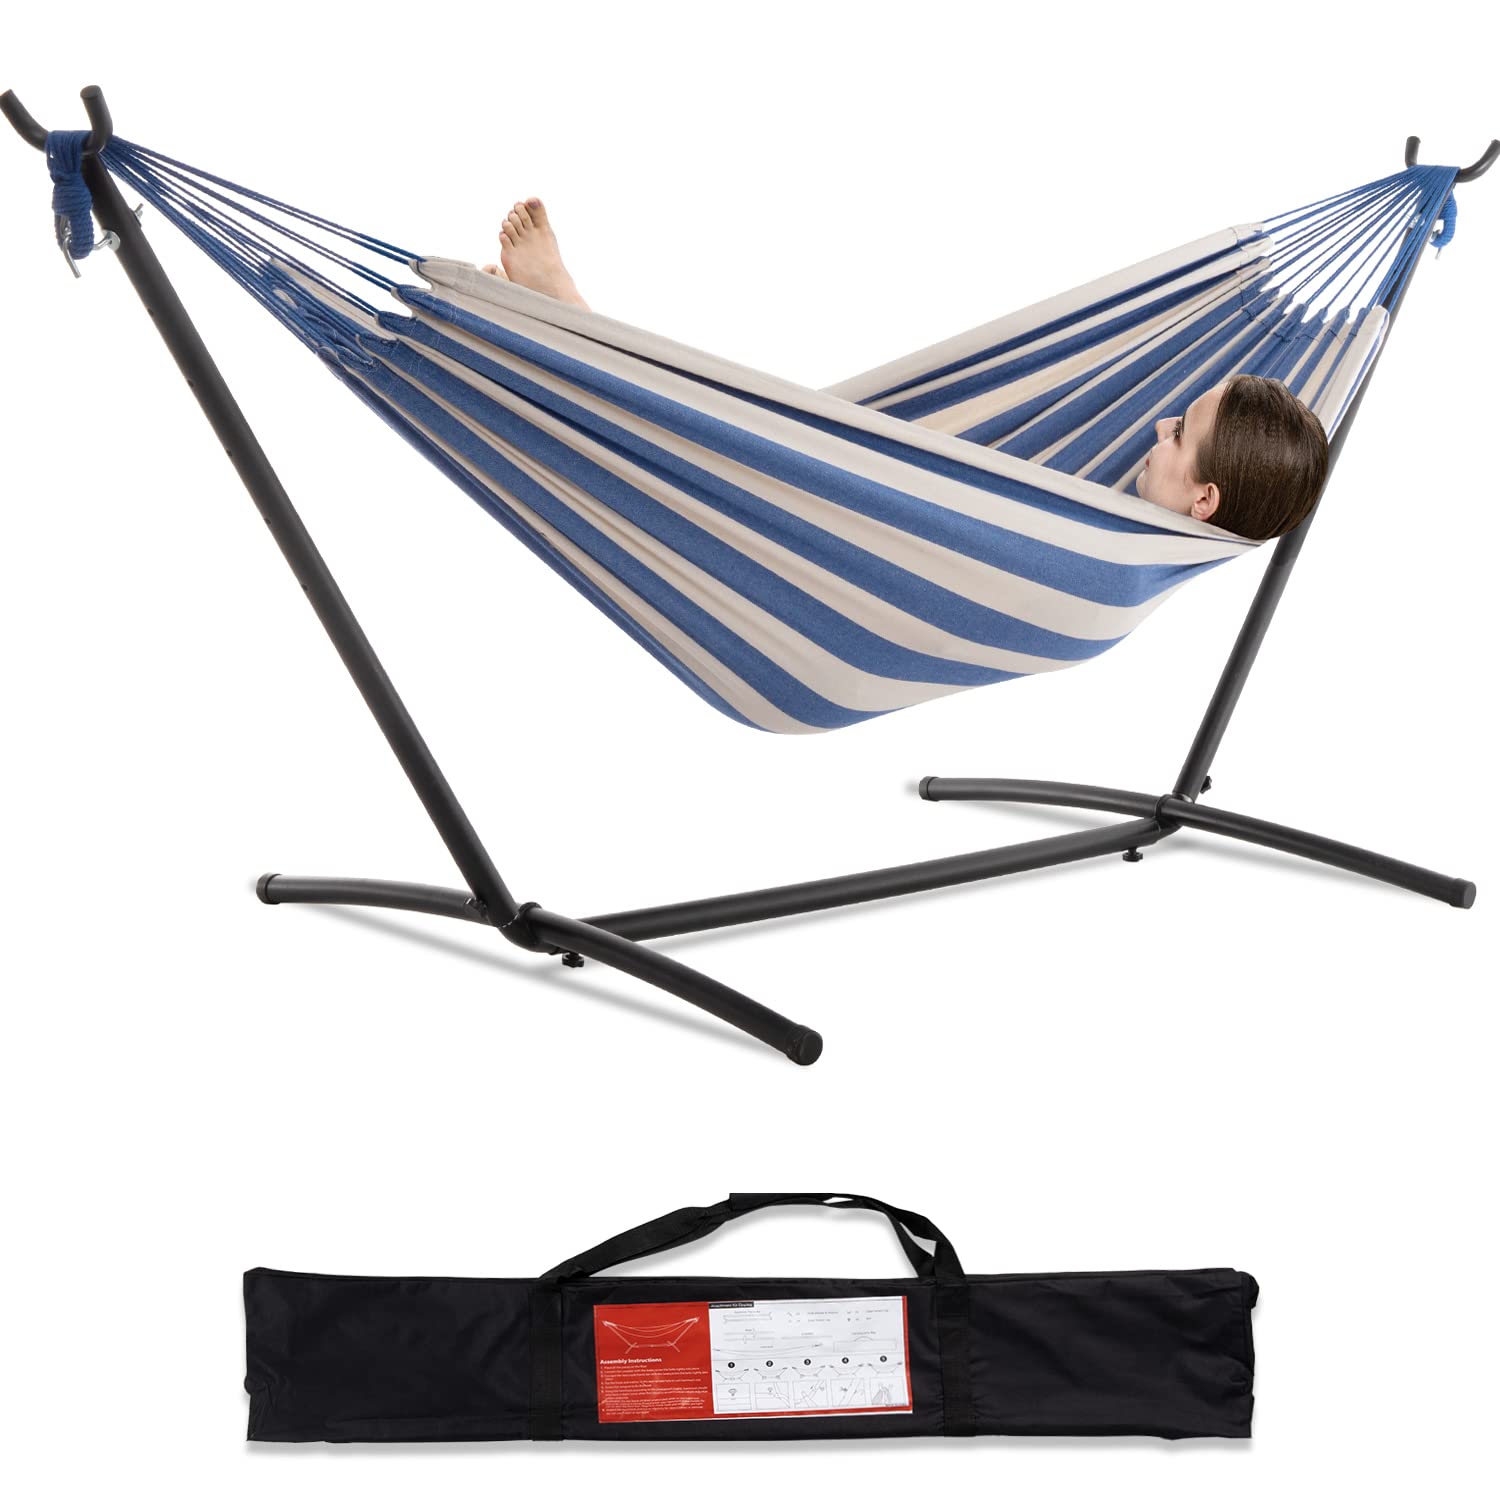 PNAEUT Double Hammock with Space Saving Steel Stand Included 2 Person Heavy Duty Garden Yard Outdoor 450lb Capacity Hammocks